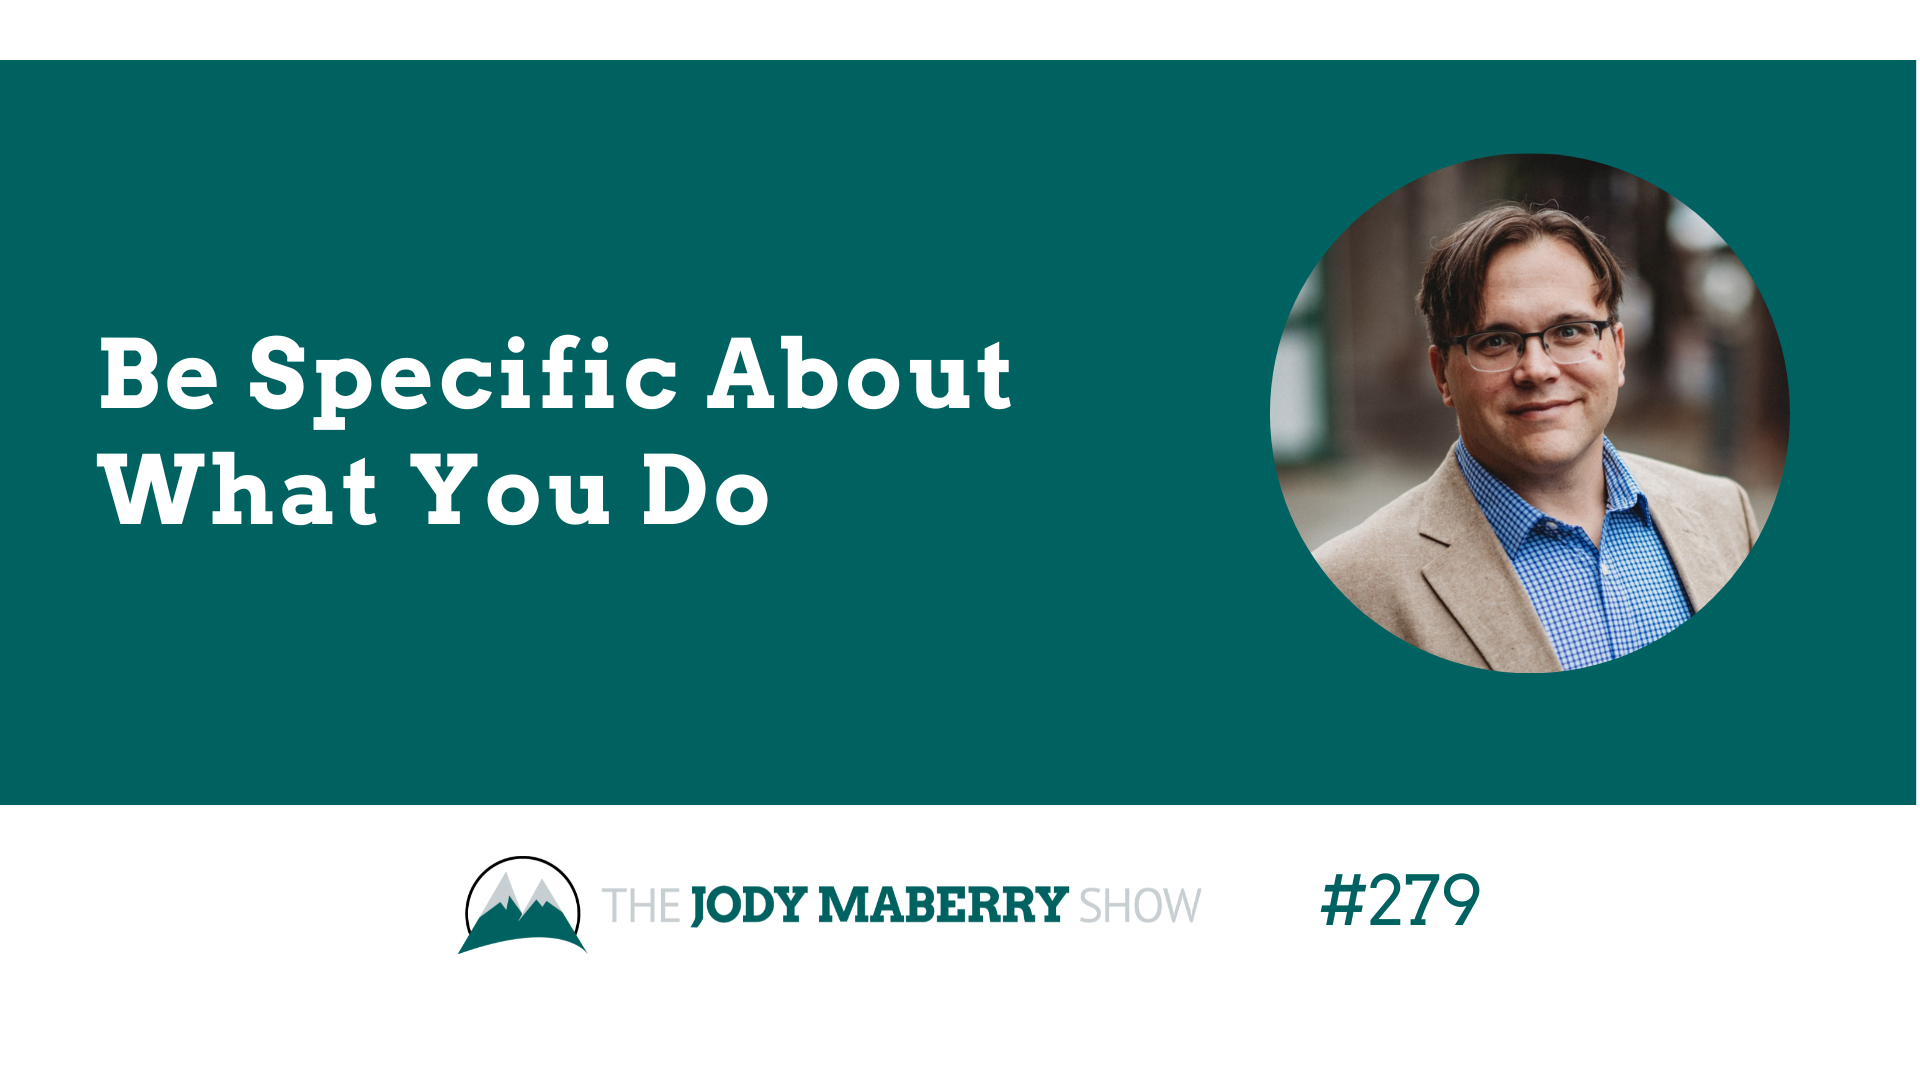 Jody Maberry Show Episode 279 Be Specific About What you Do